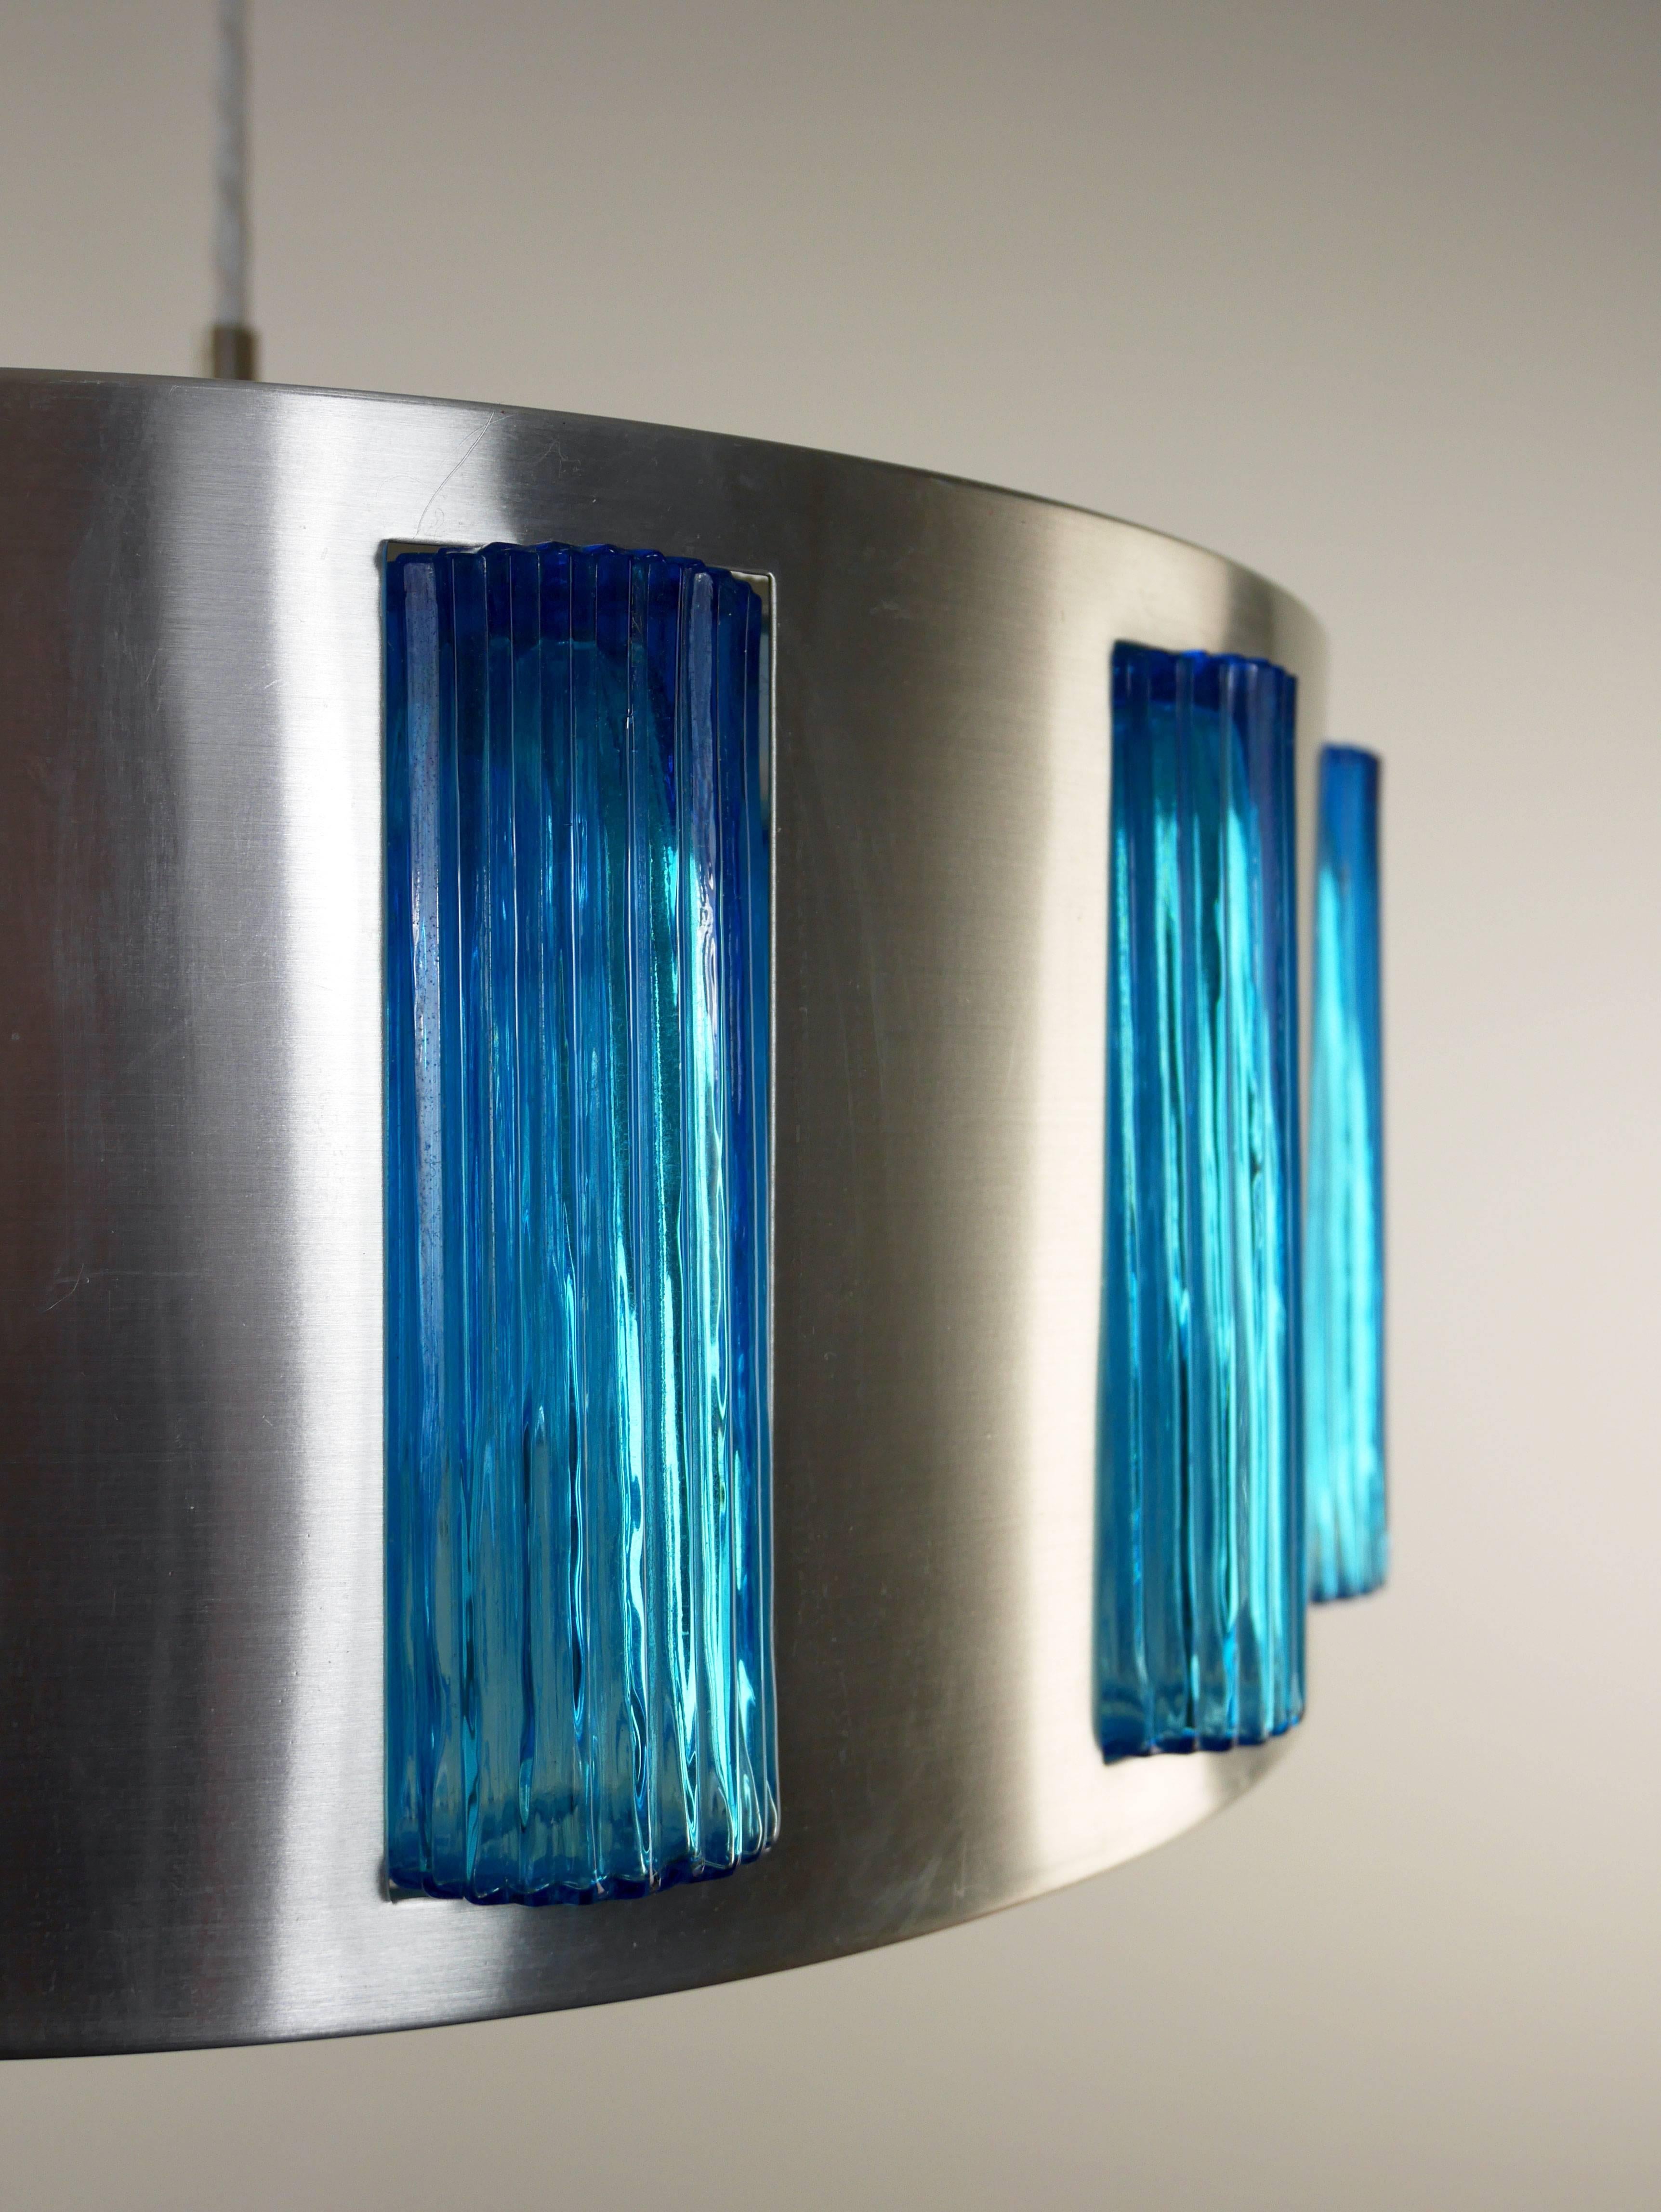 Midcentury Swedish modern drum shaped pendant in aluminium with textured blue glass cylinders by Orrefors (attributed). Top and bottom plates in structured, transparent acrylic.